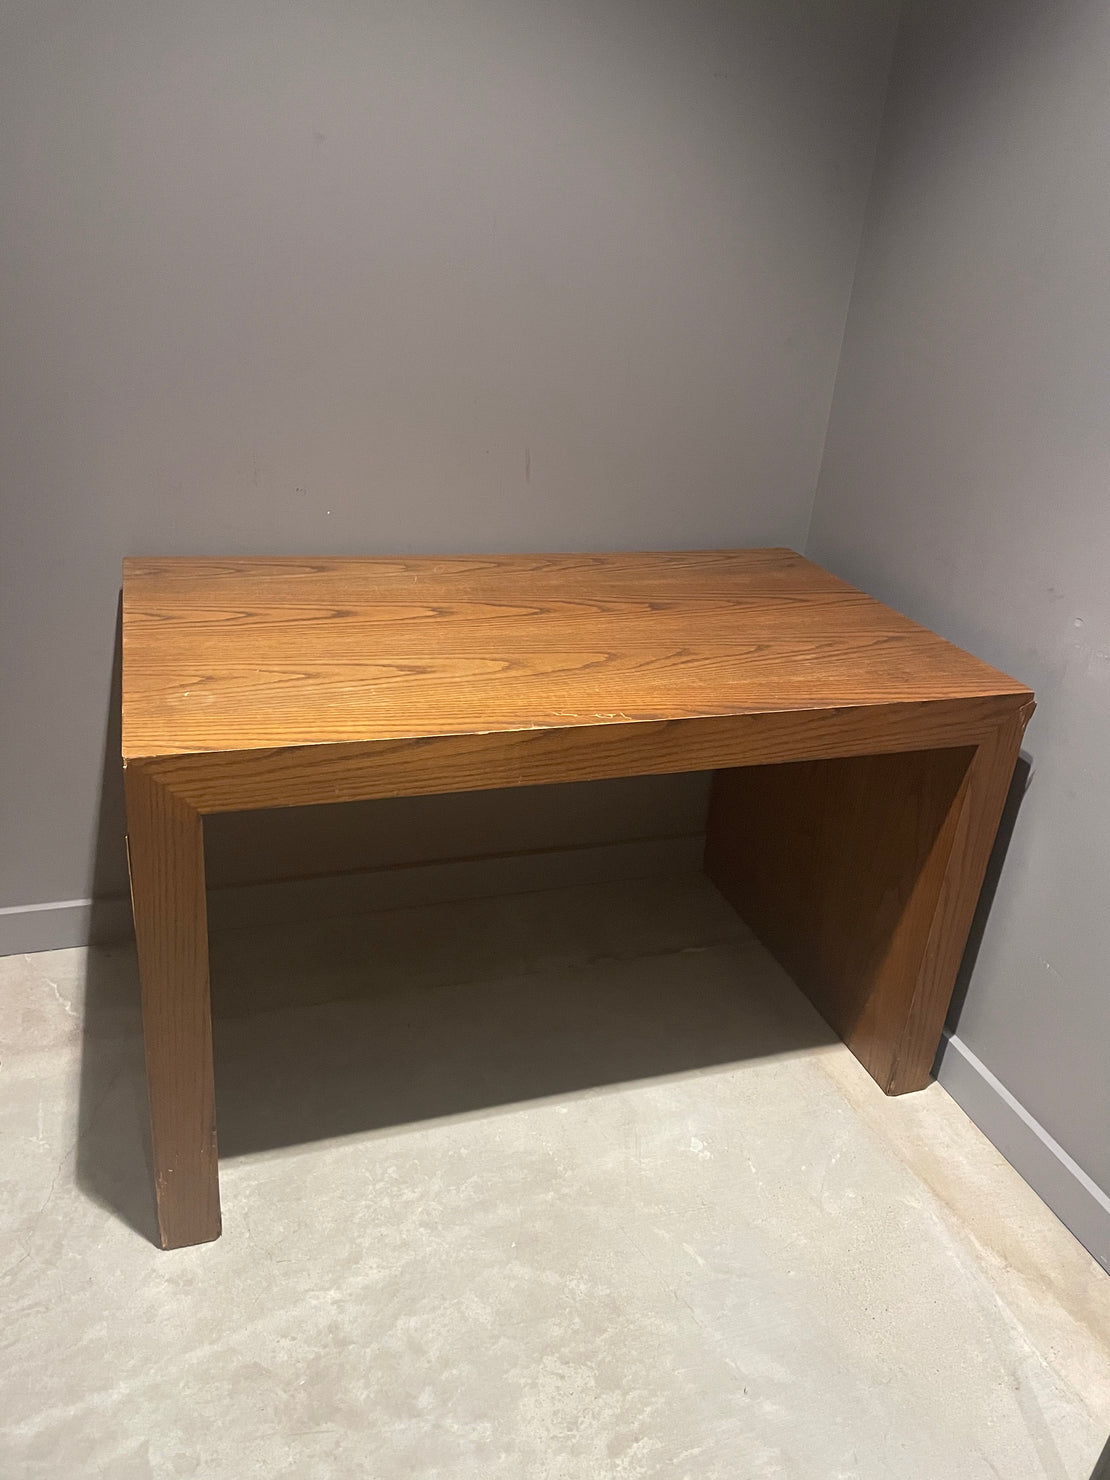 Warehouse Sale DNS 10 - Wooden Table